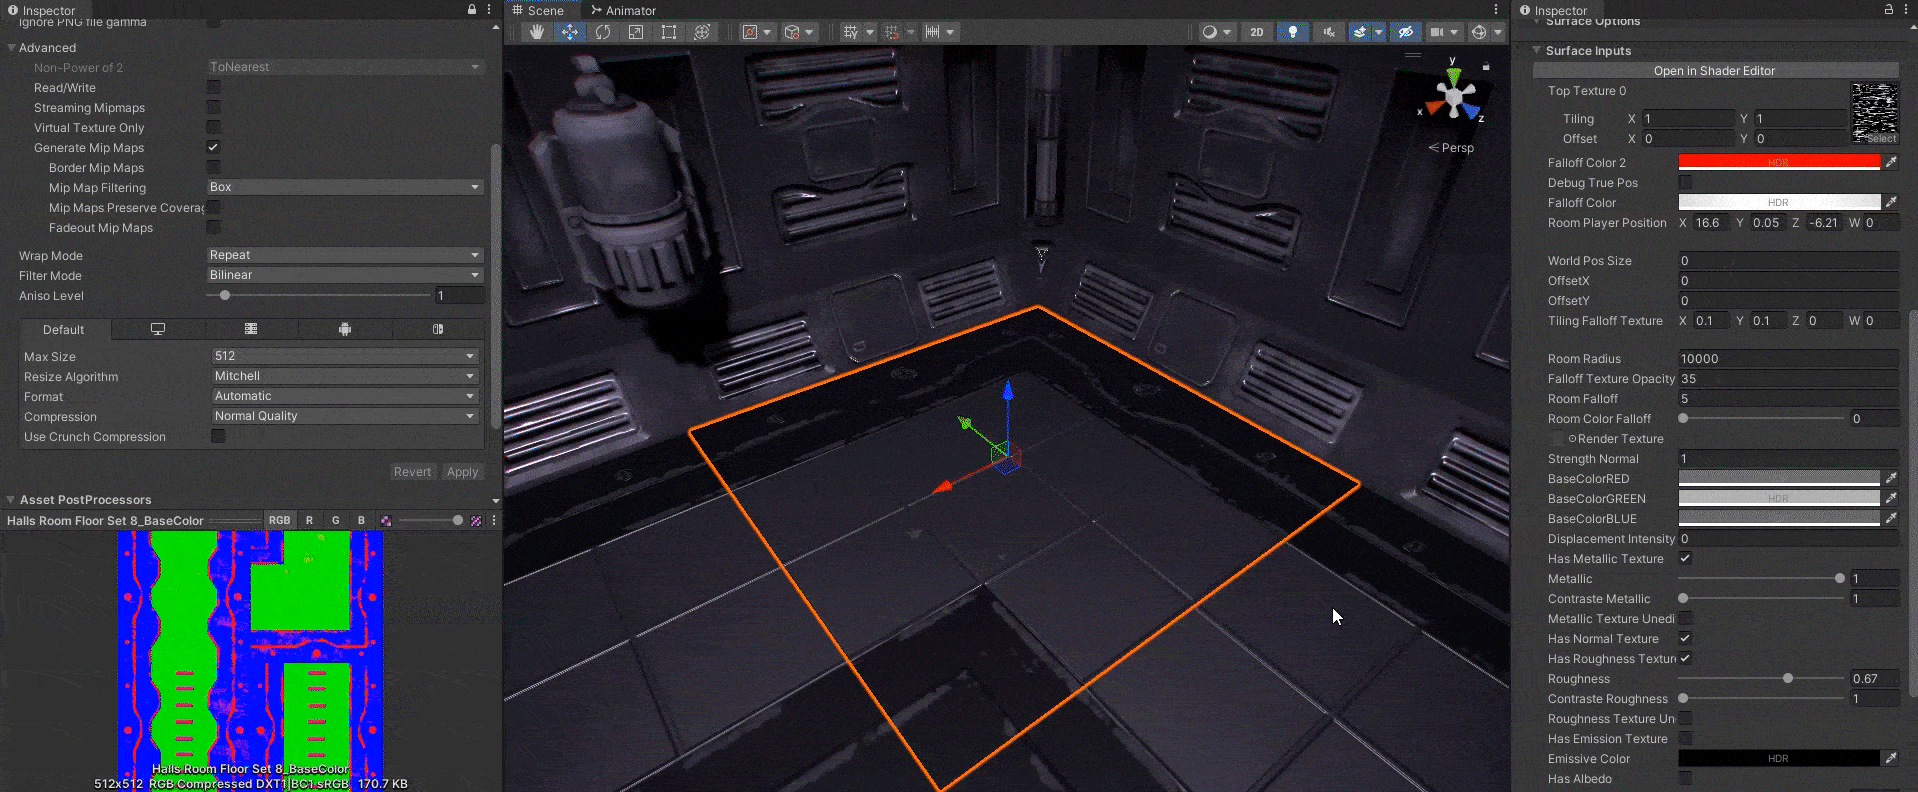 GIF of the splatmap in action inside the Unity Editor.